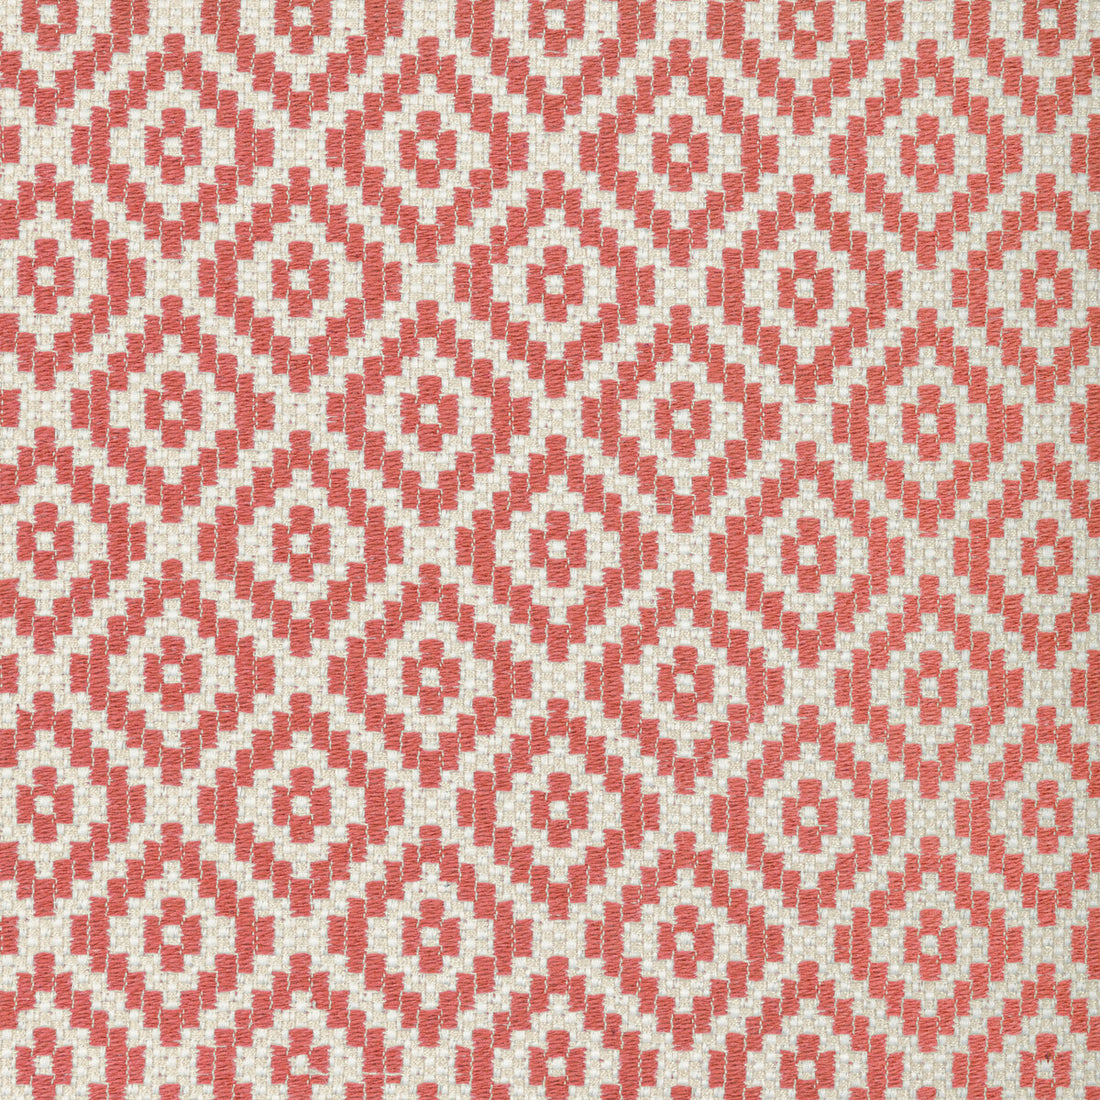 Kravet Design fabric in 36411-7 color - pattern 36411.7.0 - by Kravet Design in the Performance Crypton Home collection